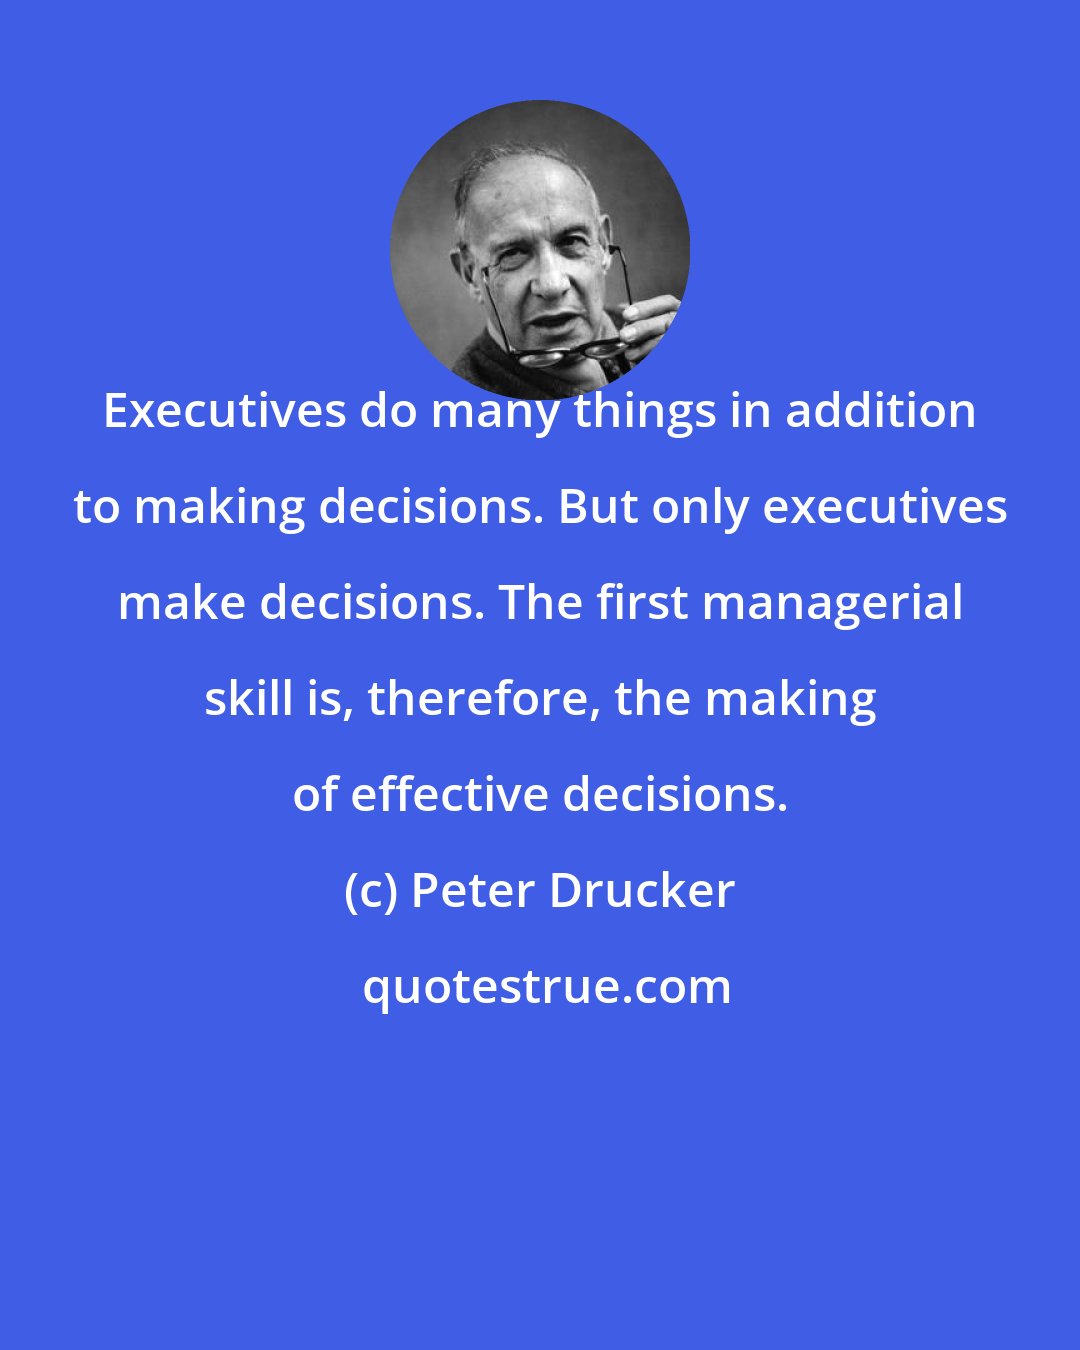 Peter Drucker: Executives do many things in addition to making decisions. But only executives make decisions. The first managerial skill is, therefore, the making of effective decisions.